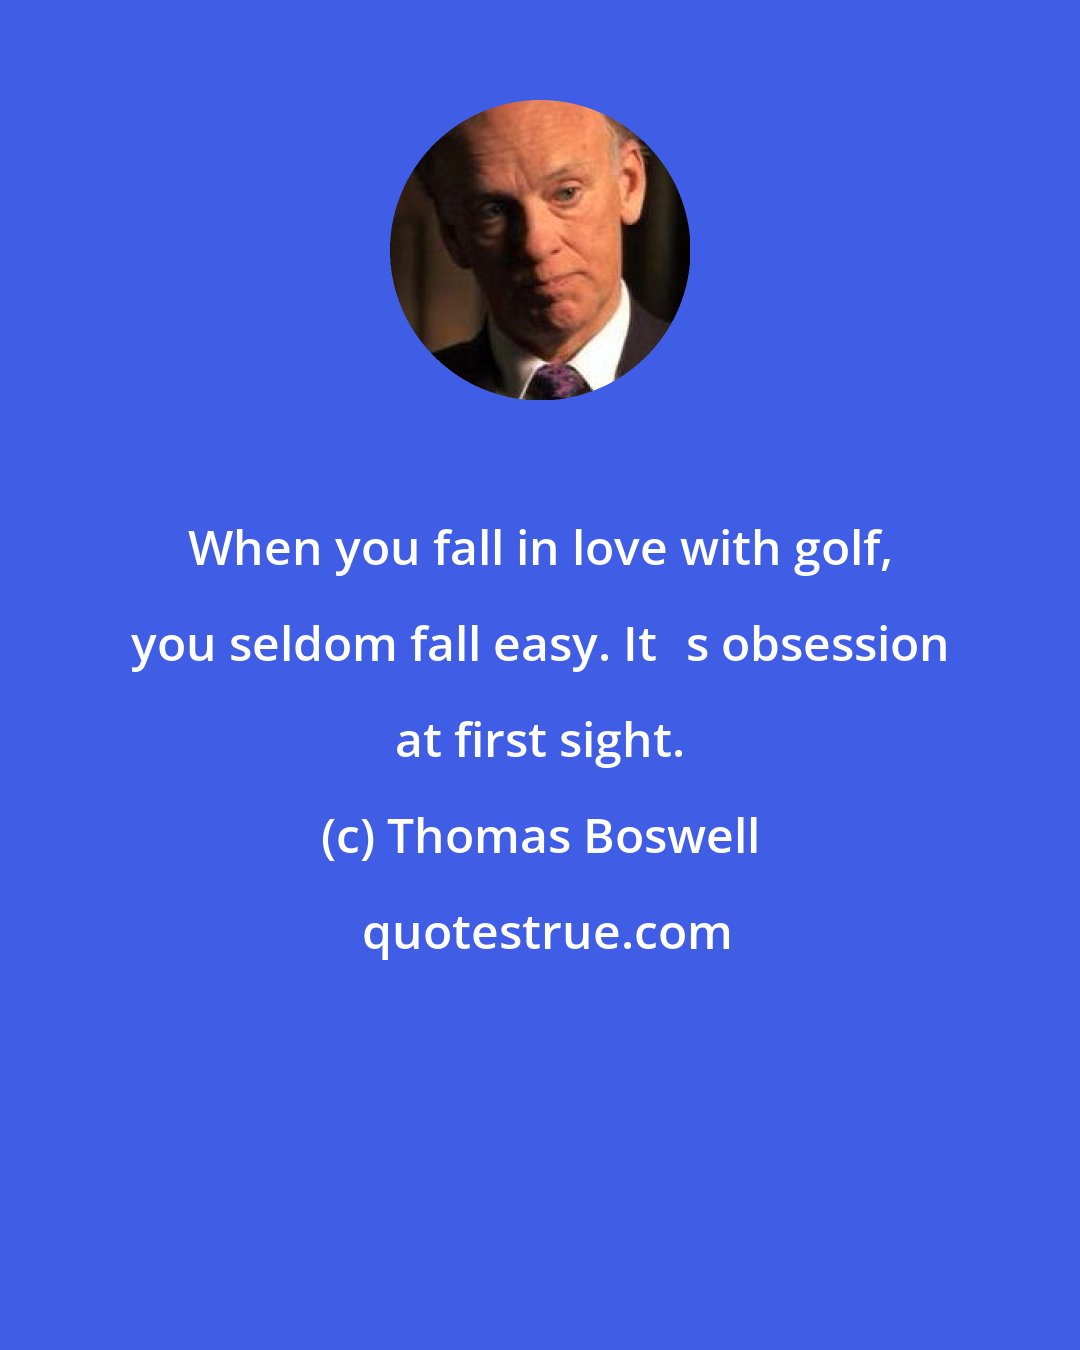 Thomas Boswell: When you fall in love with golf, you seldom fall easy. Itʹs obsession at first sight.